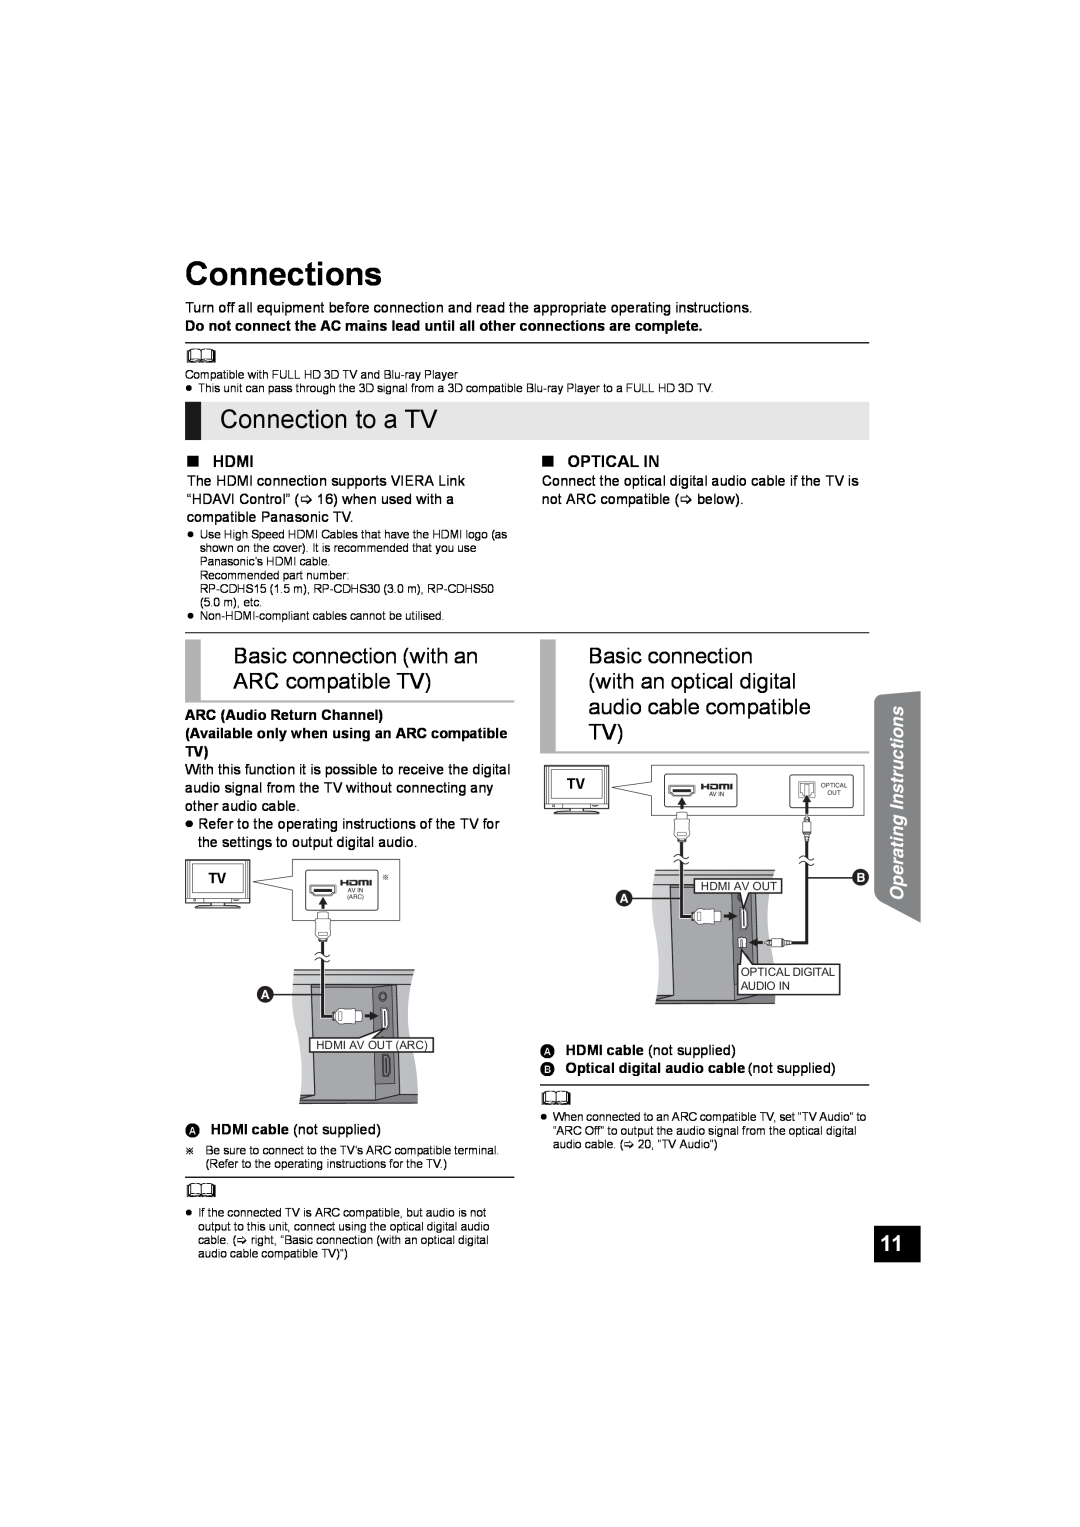 Panasonic SC-HTB500 Connections, Connection to a TV, Basic connection with an ARC compatible TV, with an optical digital 